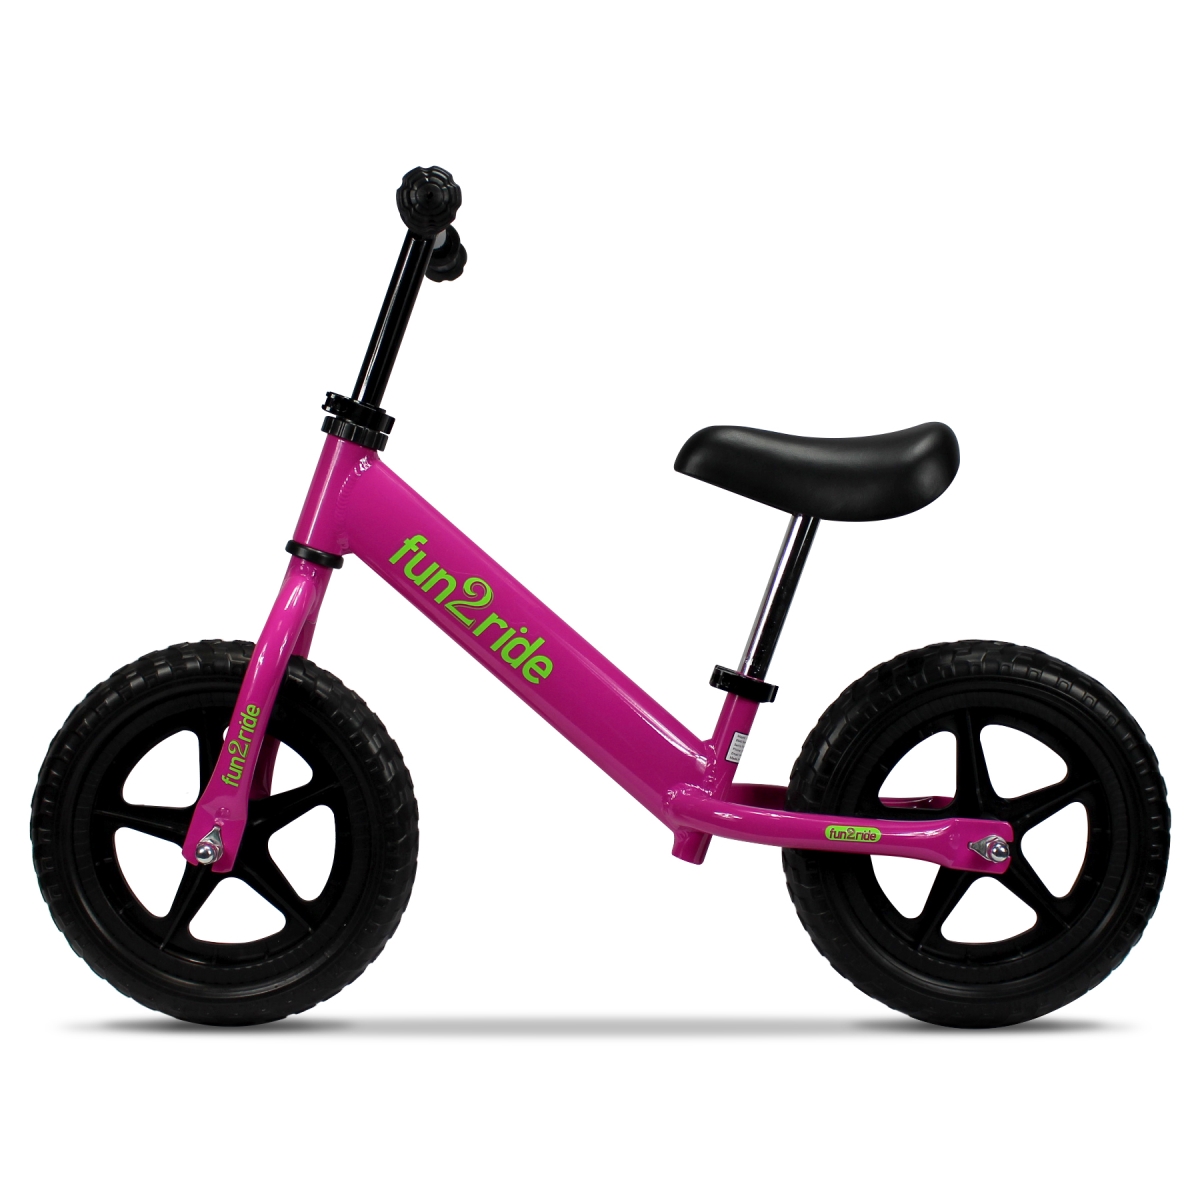 F2r-pk Unisex Lightweight Kids Balance Bike With 12 In. Puncture Resistant Tires, Pink